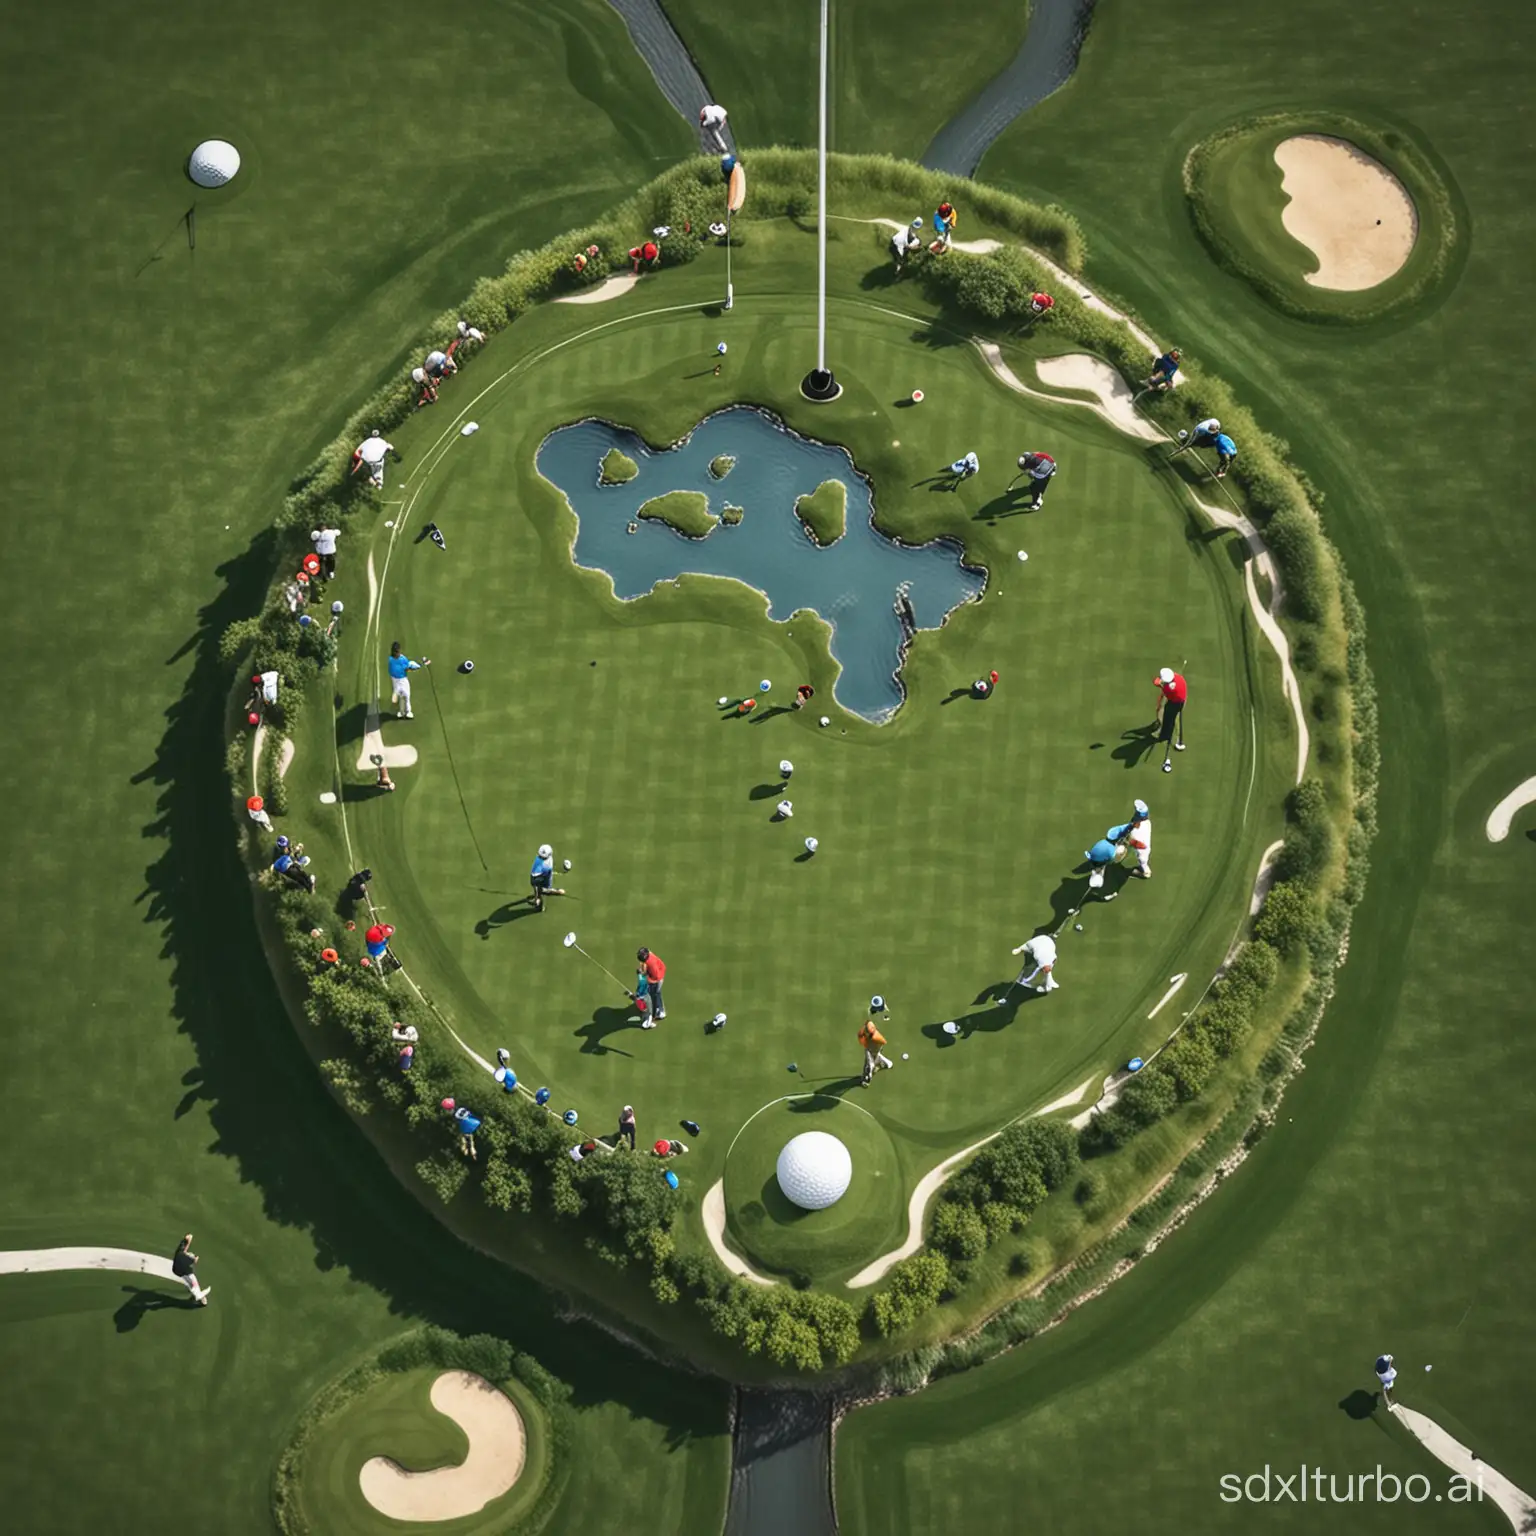 Create a picture of an idea where golfers can meet eachother from all over the world throughout an app to play a round of golf and start making new connections, the concept is called ConnectGolf